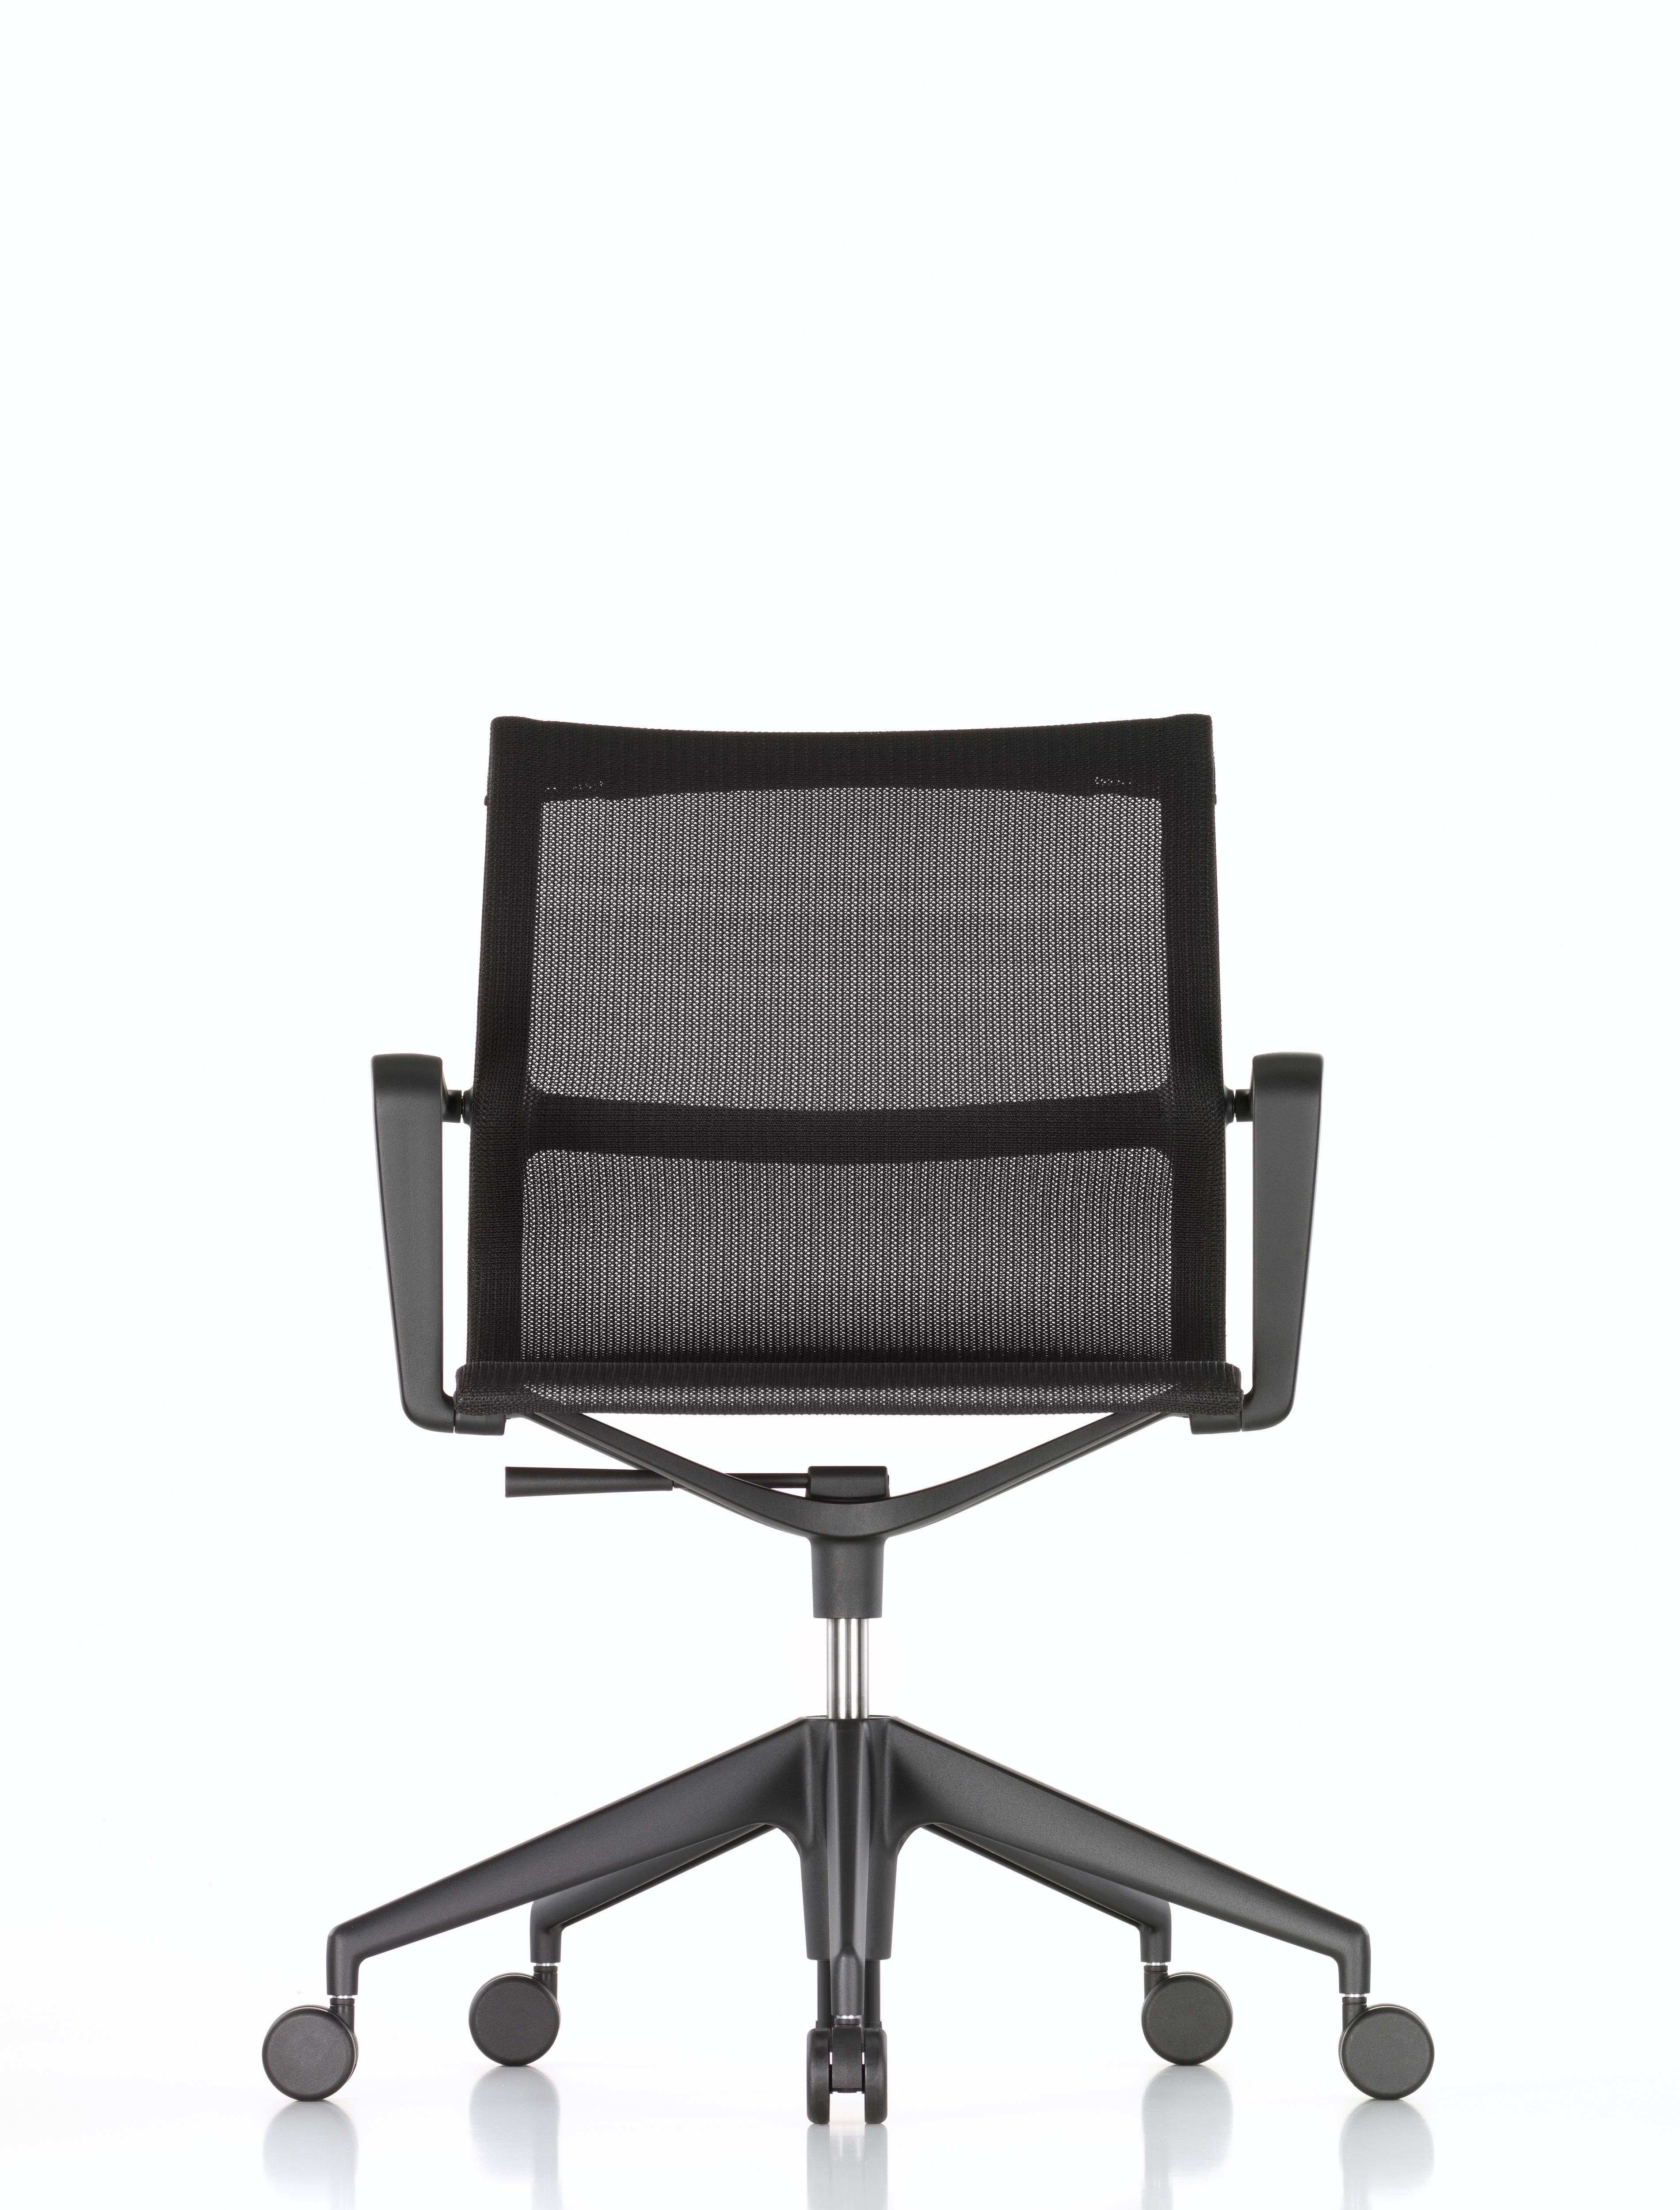 These items are currently only available in the United States.

The structure of Physix is based on the idea of creating a continuous seat shell by stretching a single textile panel between two side members. With its design, the chair assumes its